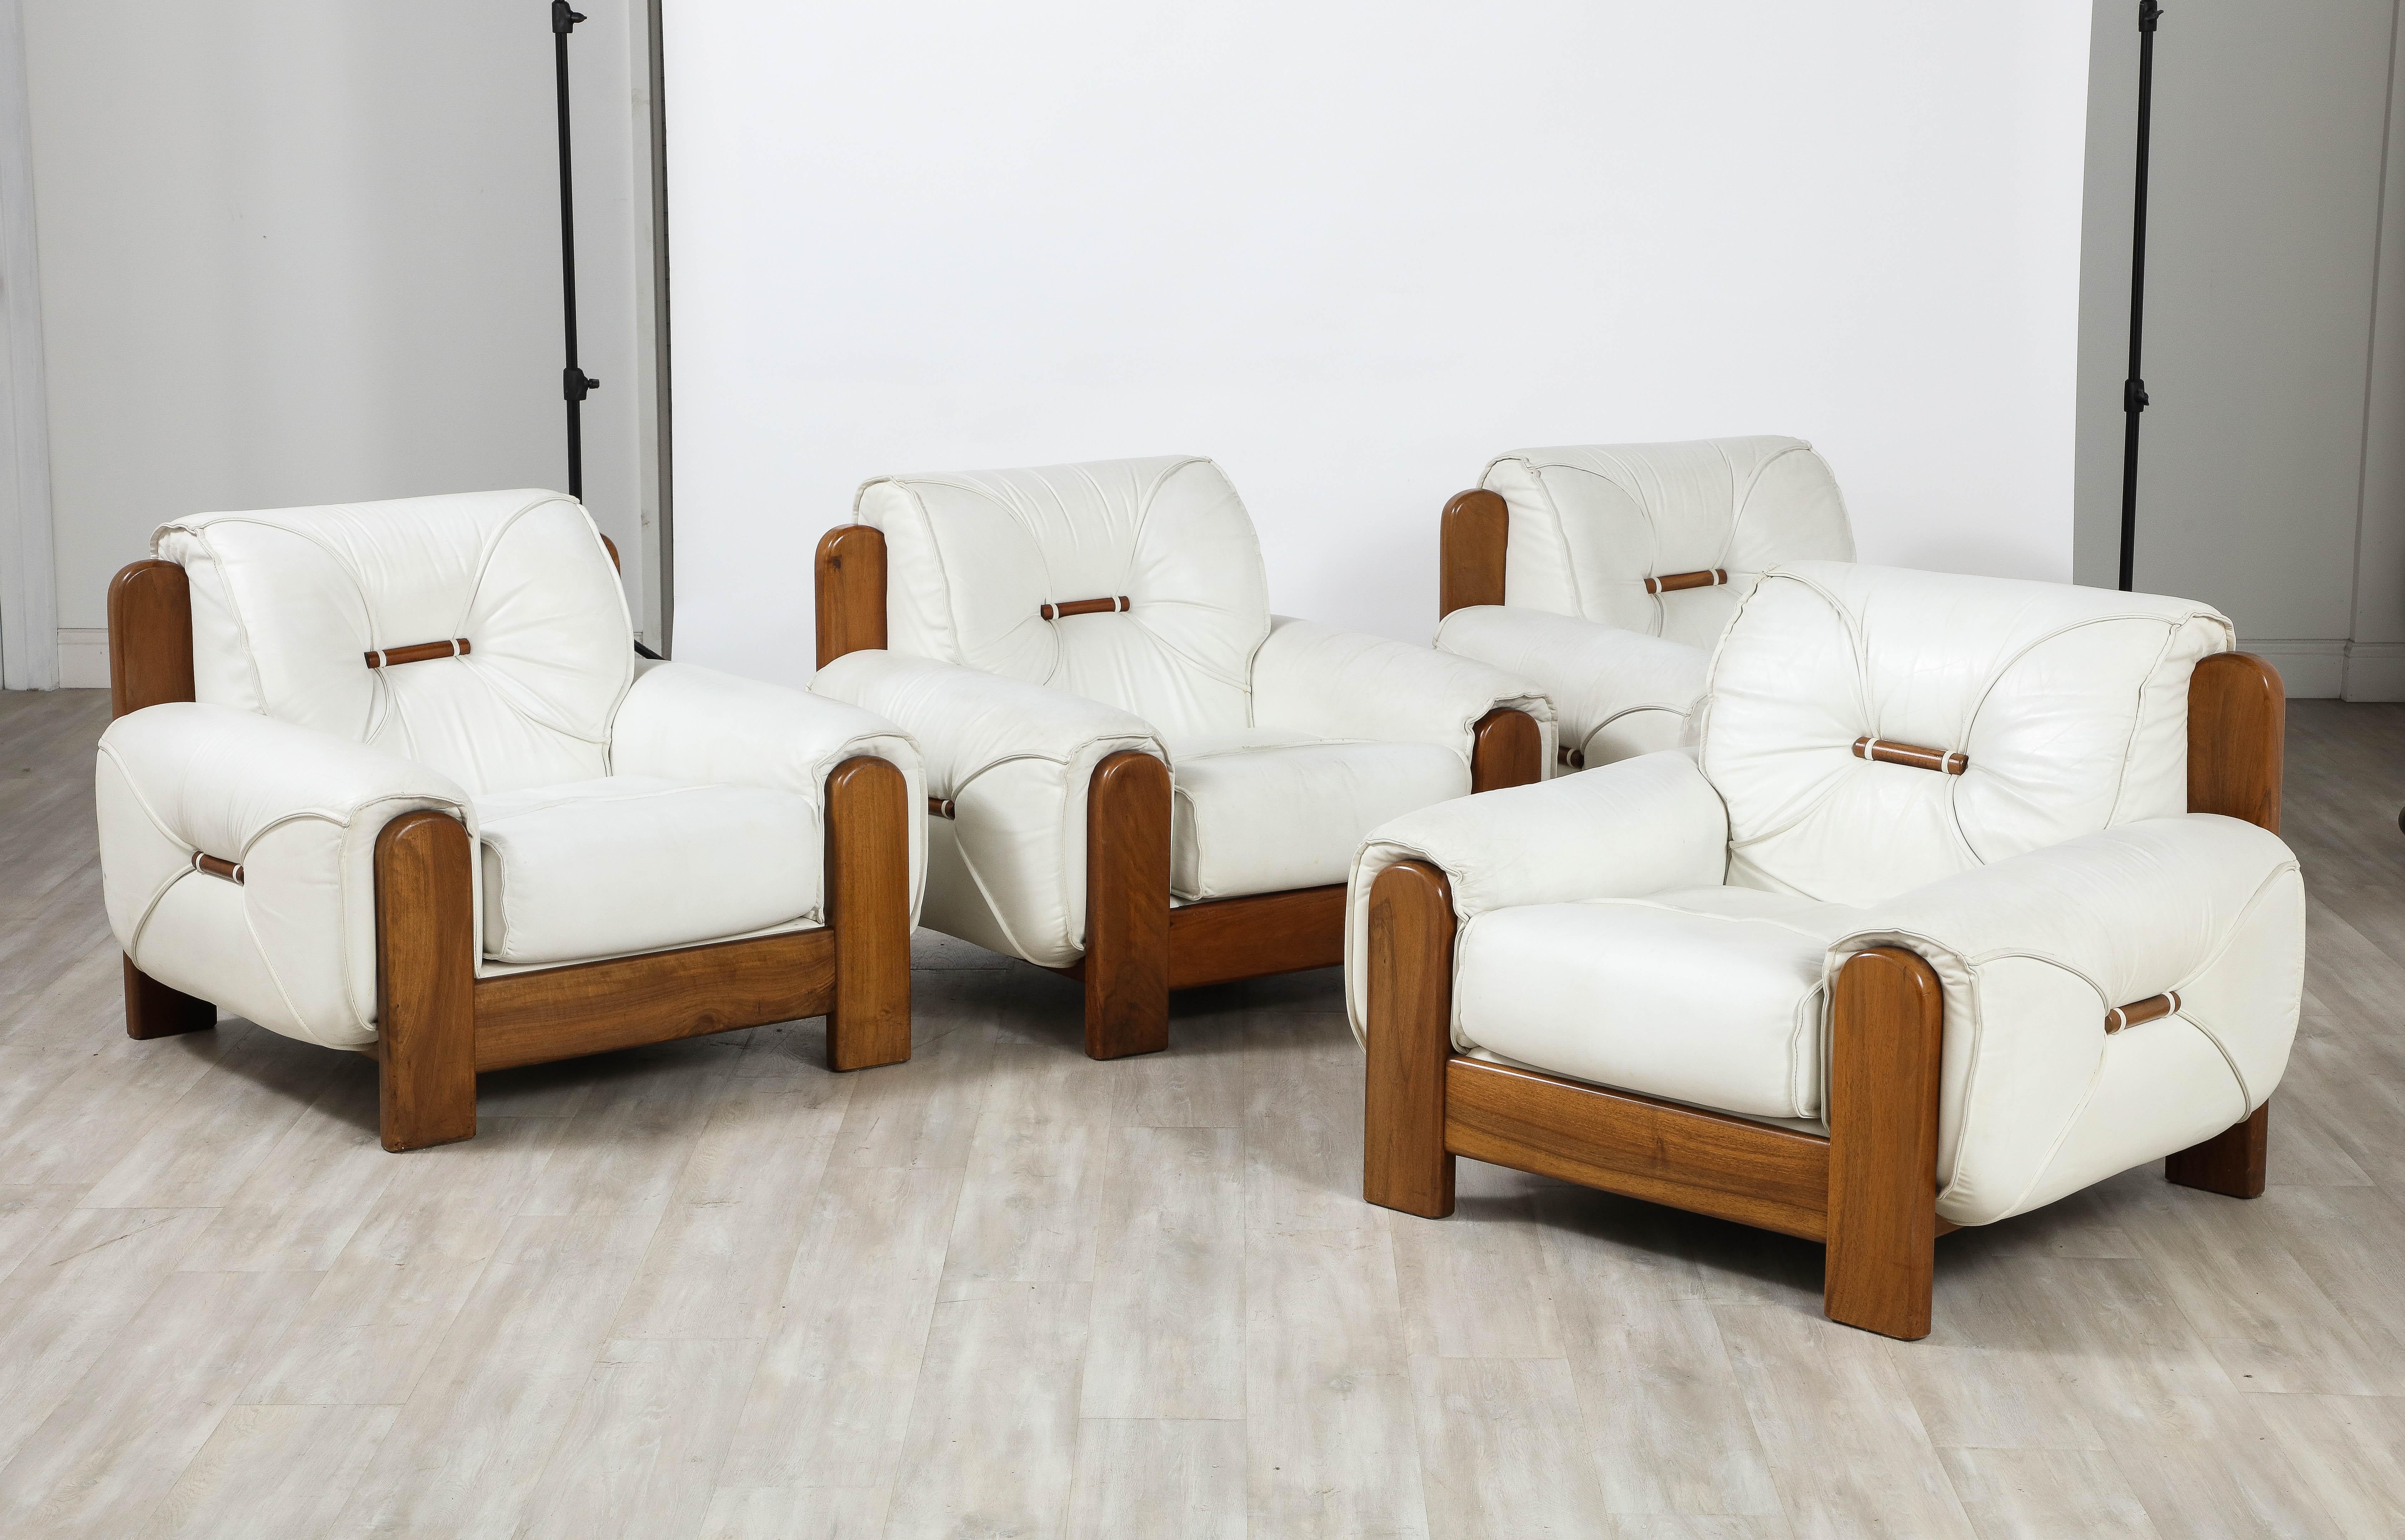 A highly unique and superb pair of Italian 1970's lounge chairs. Hand-crafted with a nod toward the Brazilian iconic designers of the period, Jean Gillon and Sergio Rodrigues. The robust walnut frames are a stunning contrast to the original white